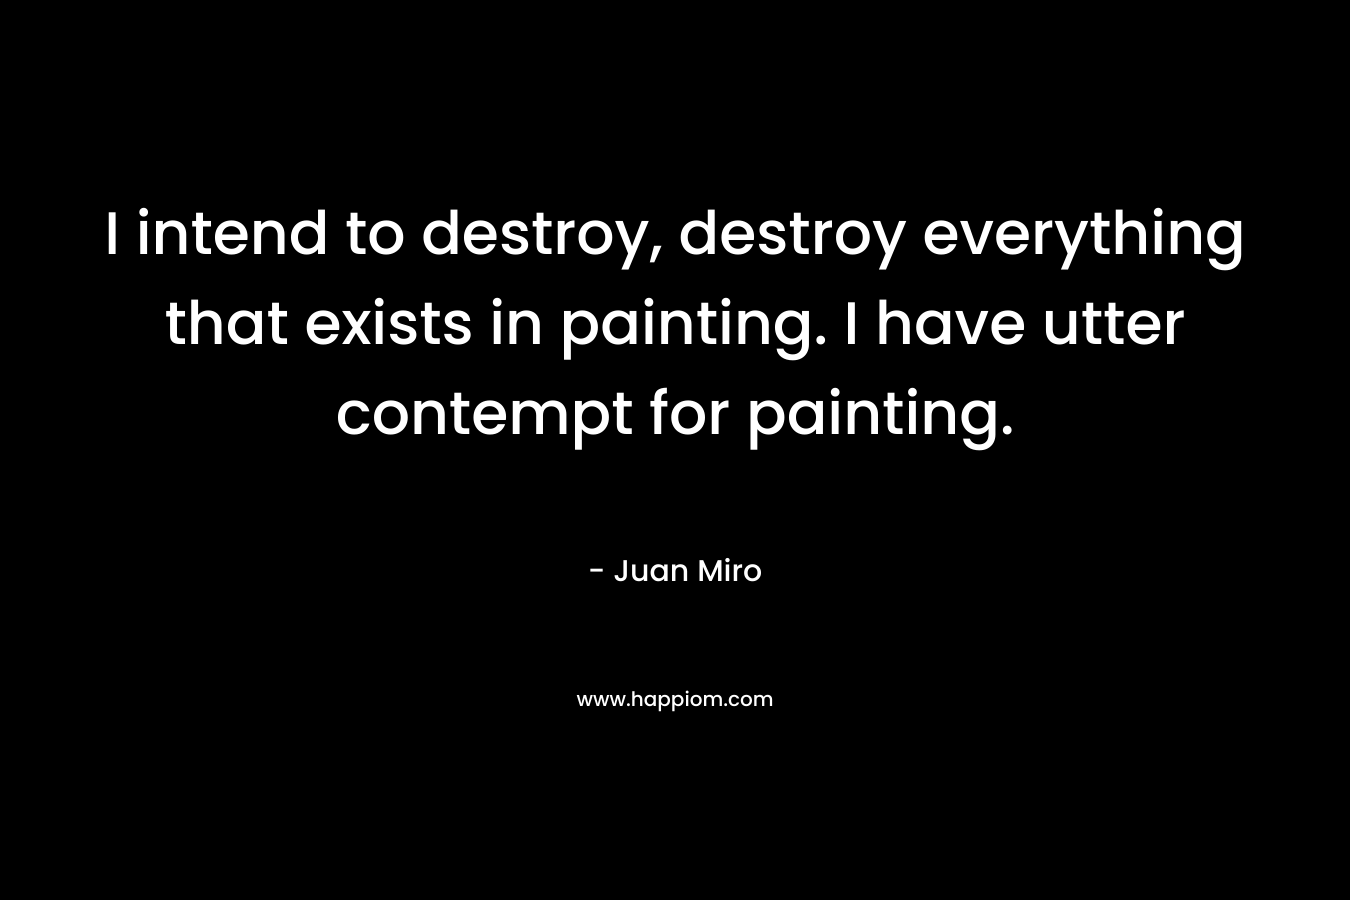 I intend to destroy, destroy everything that exists in painting. I have utter contempt for painting.